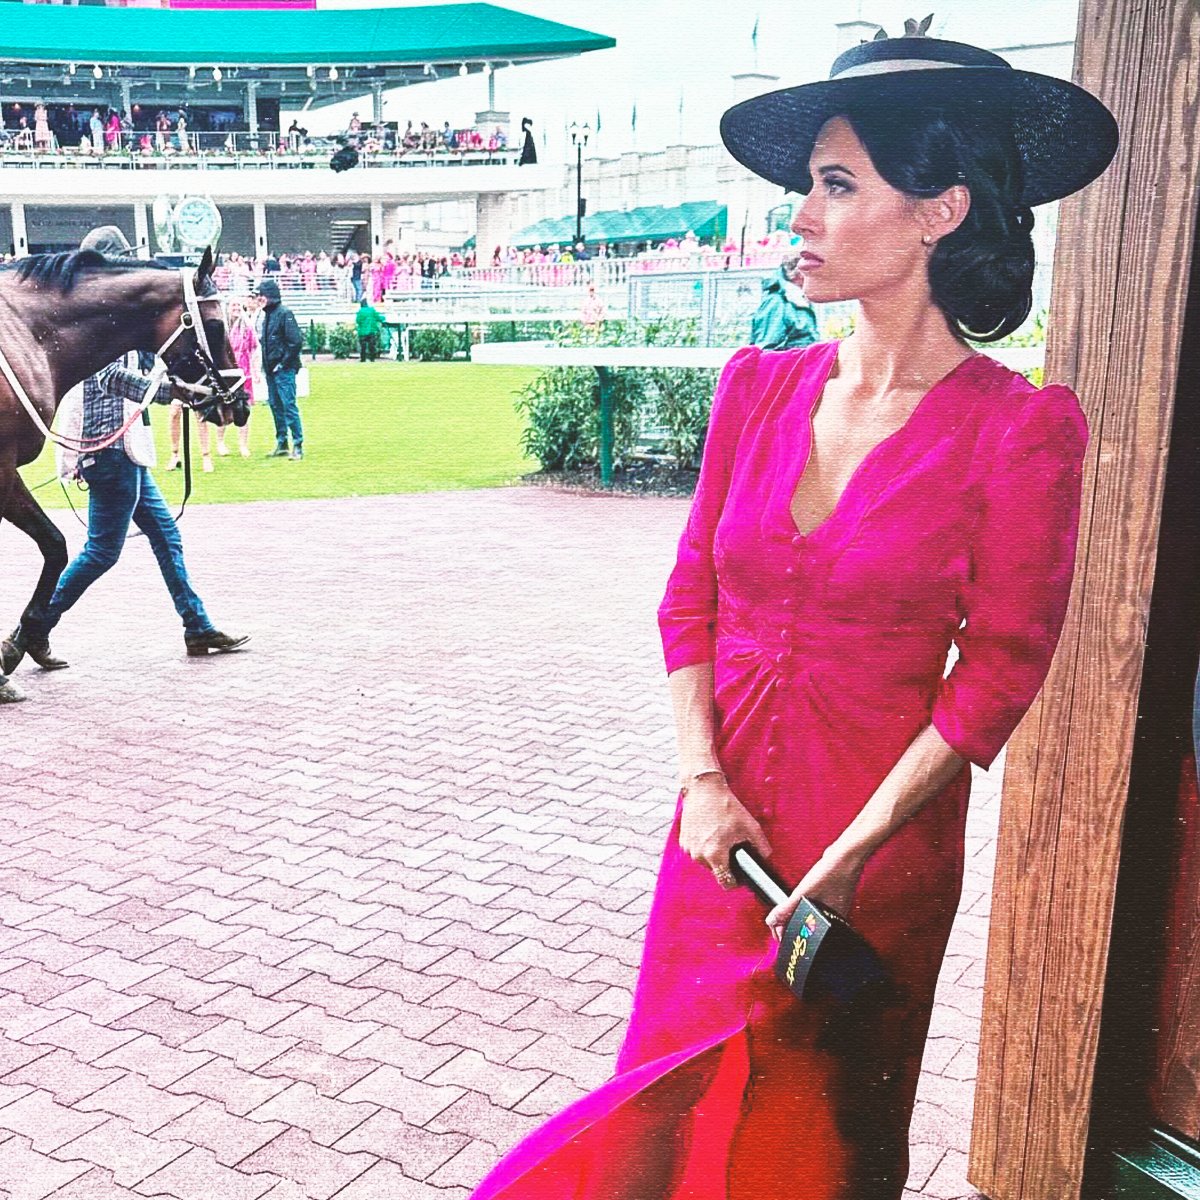 NBC Sports’ on-air hosts had some show-stopping outfits this weekend at Churchill Downs. #KyDerby🌹✨